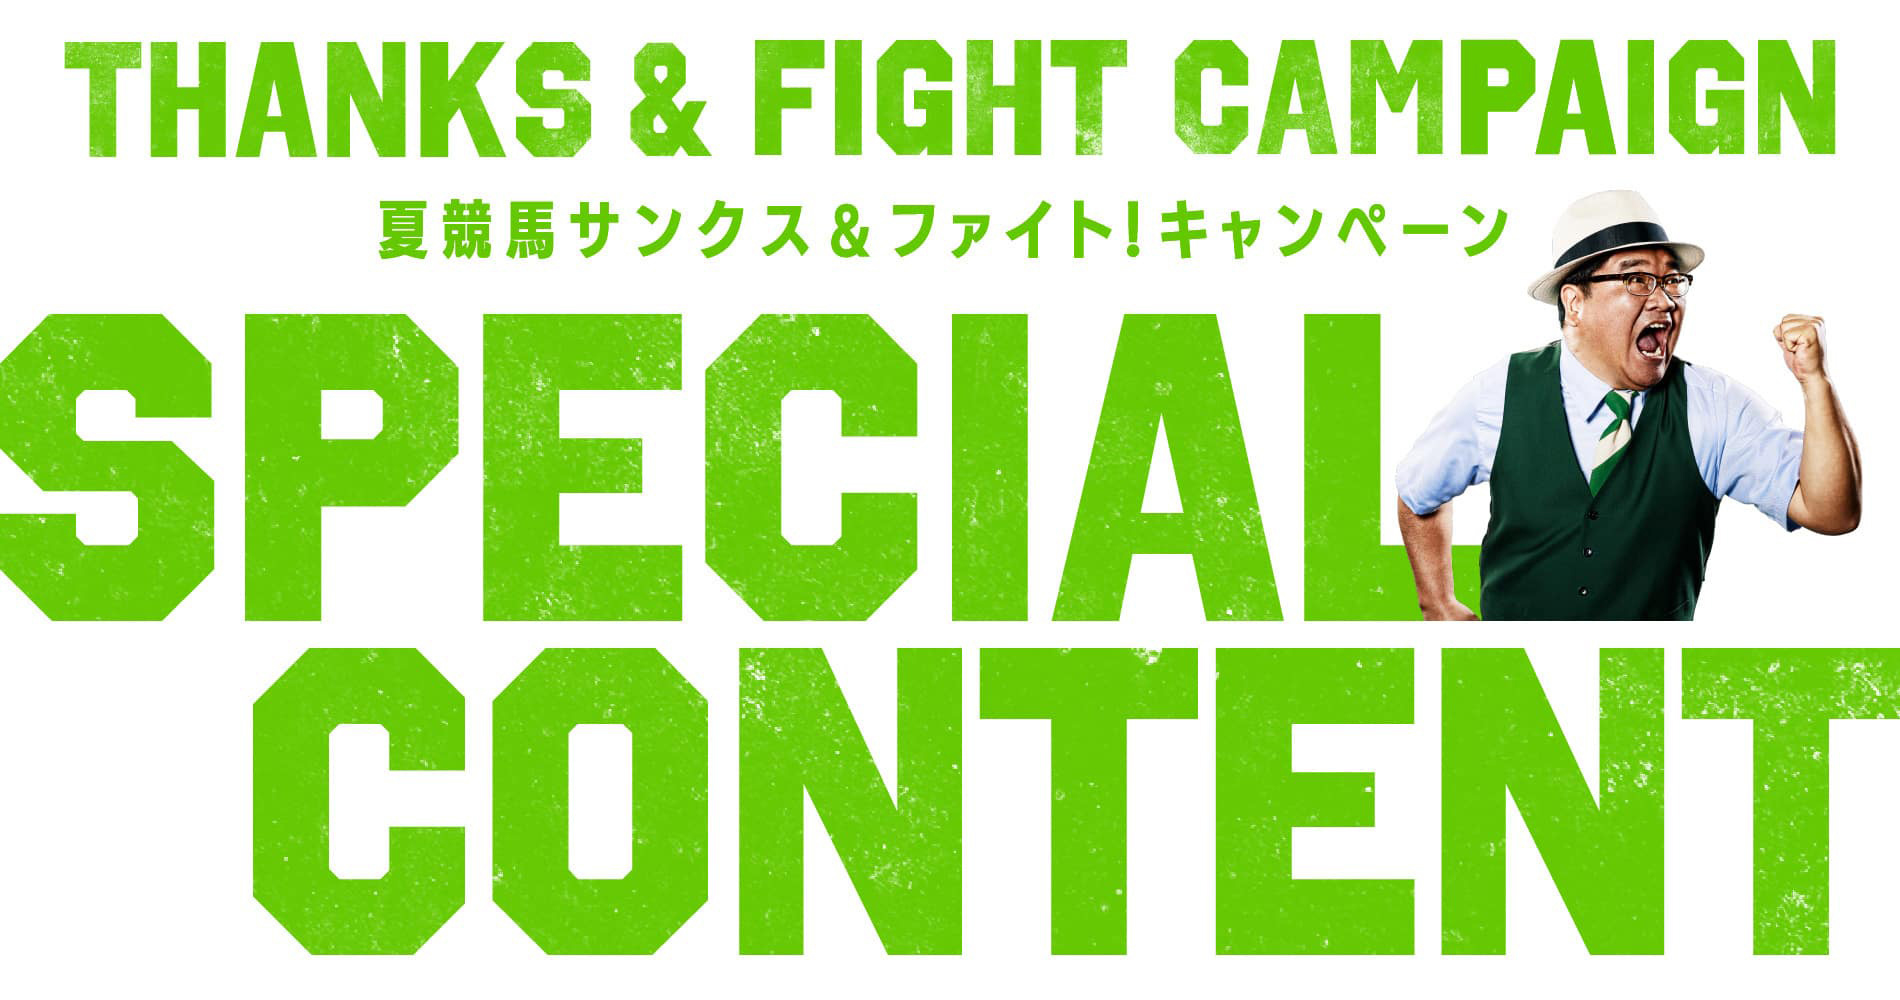 THANKS & FIGHT CAMPAIGN 夏競馬サンクス＆ファイト！キャンペーン SPECIAL CONTENT